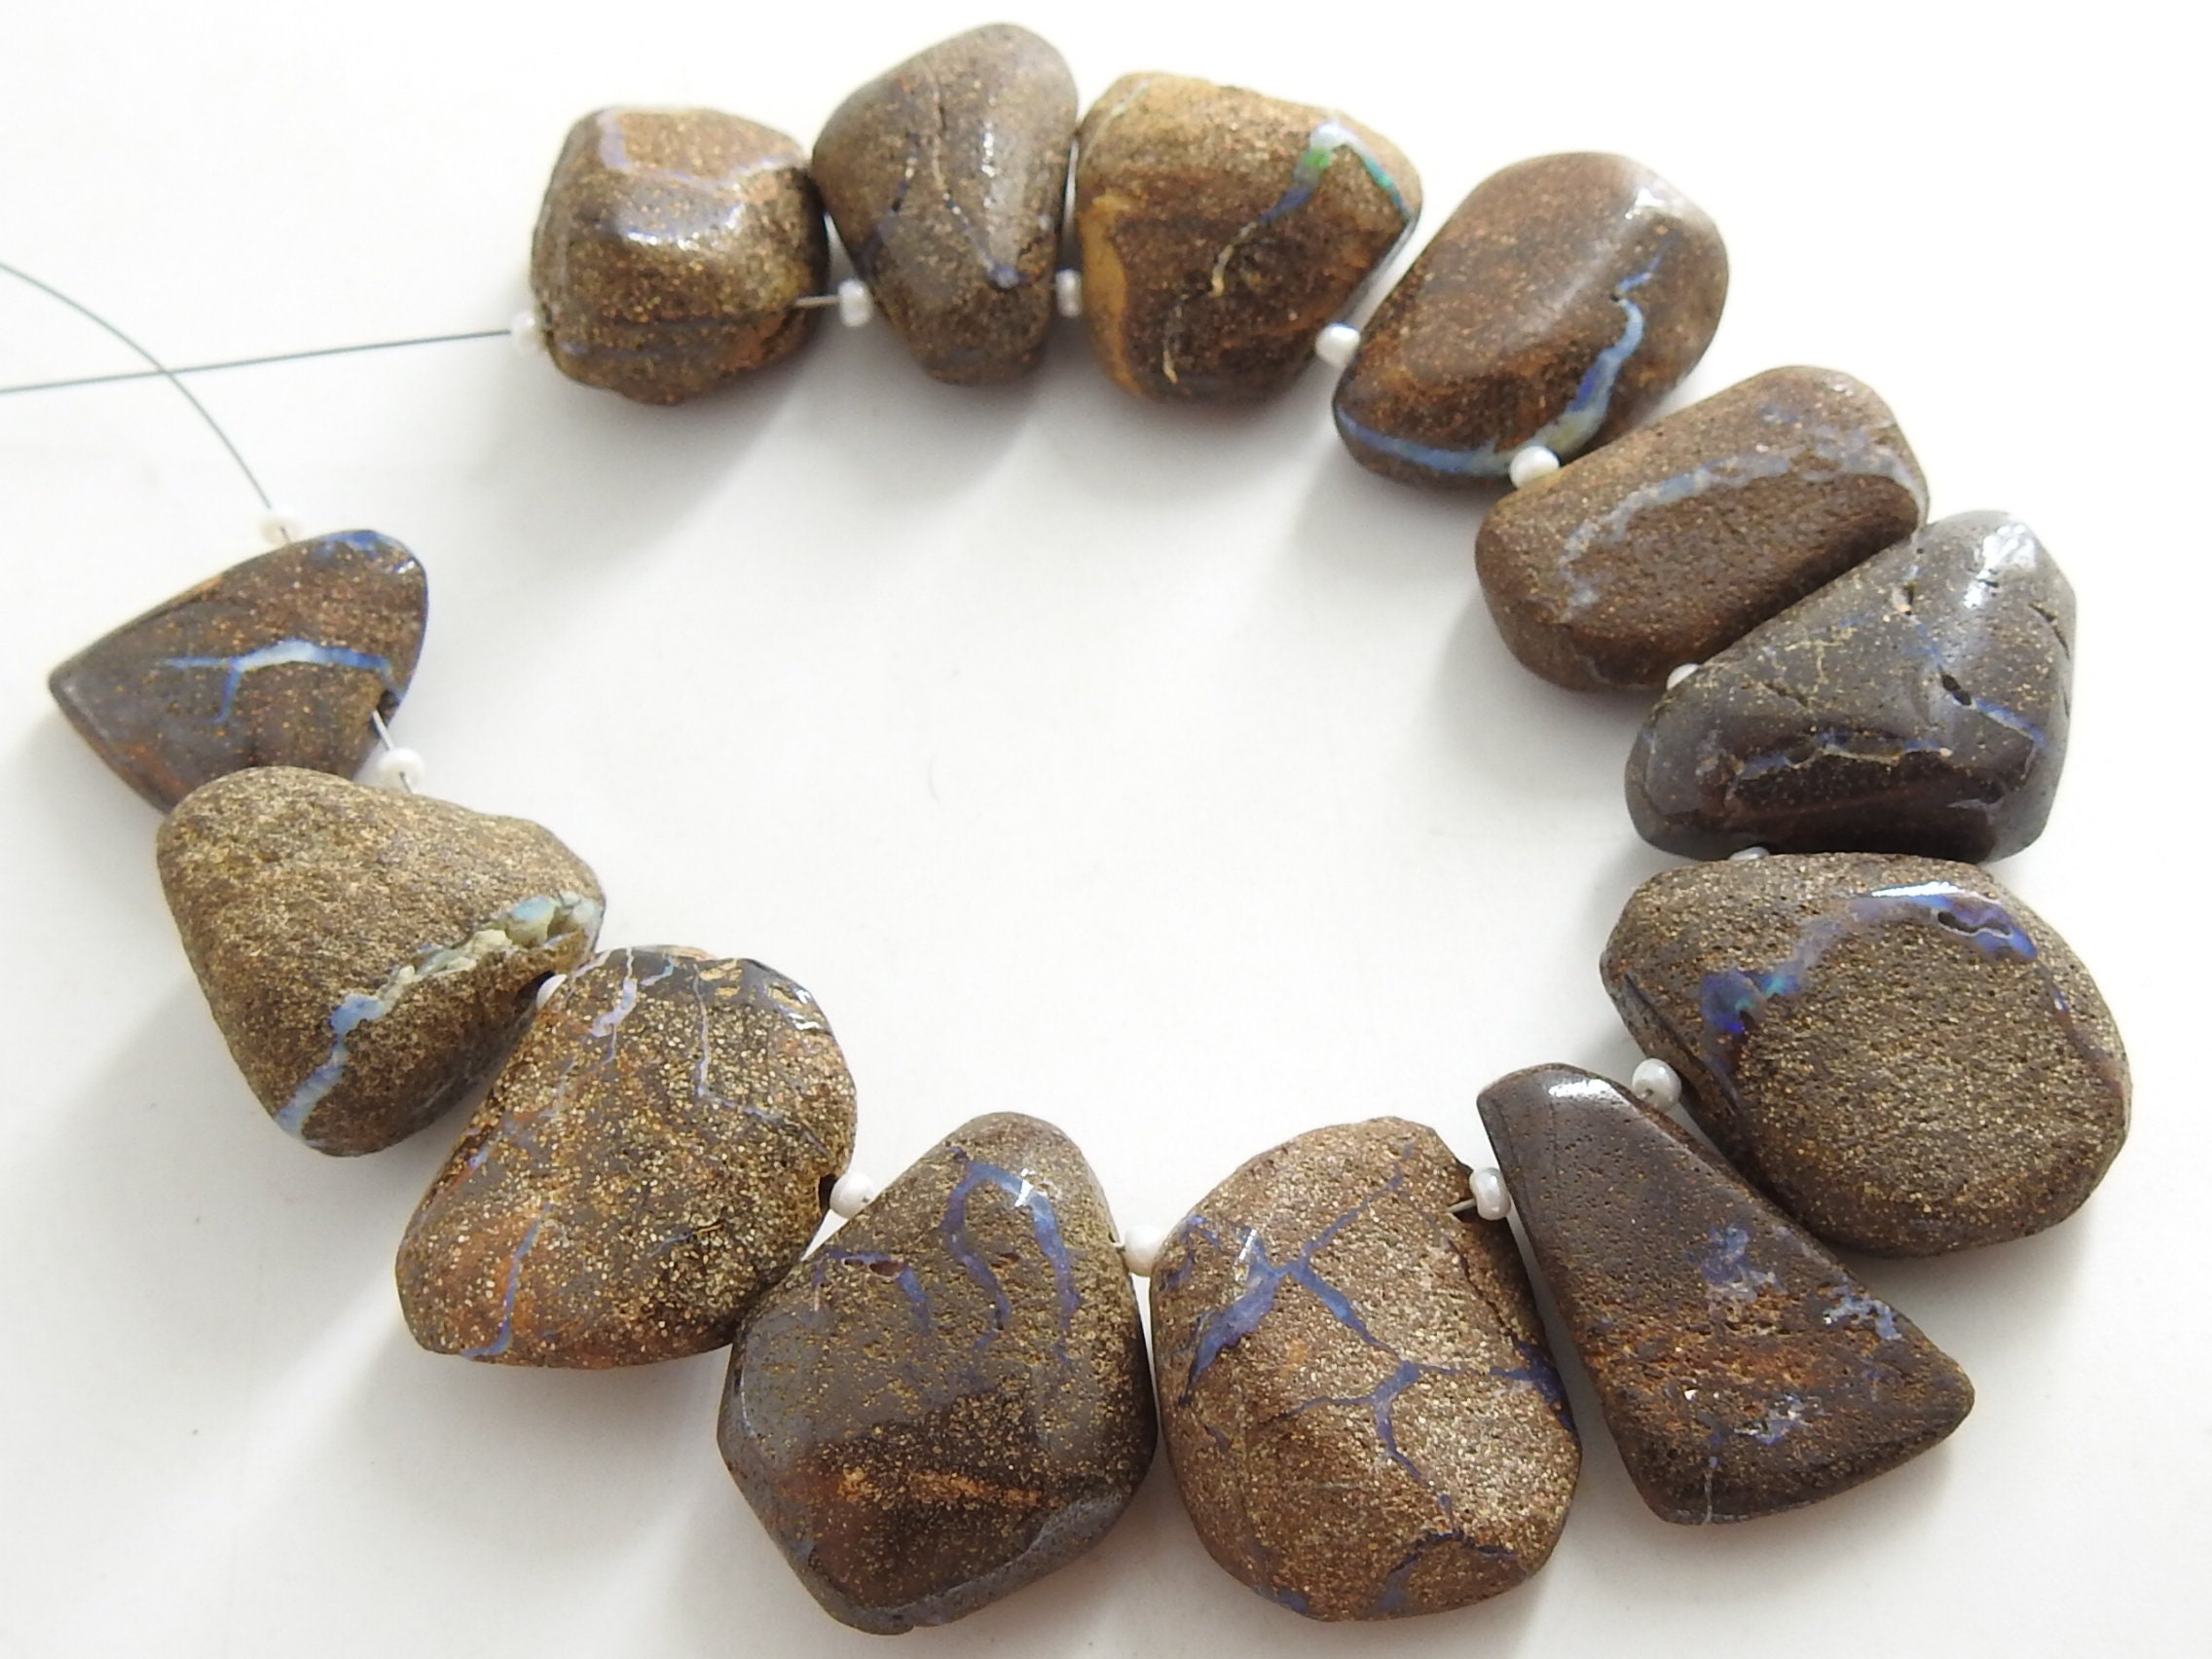 100%Natural Boulder Opal Smooth Fancy Briolette,Tumbke,Nugget,Irregular Shape Bead,Loose Stone,Minerals,Multi Fire 13Piece Strand (WM)R1 | Save 33% - Rajasthan Living 17